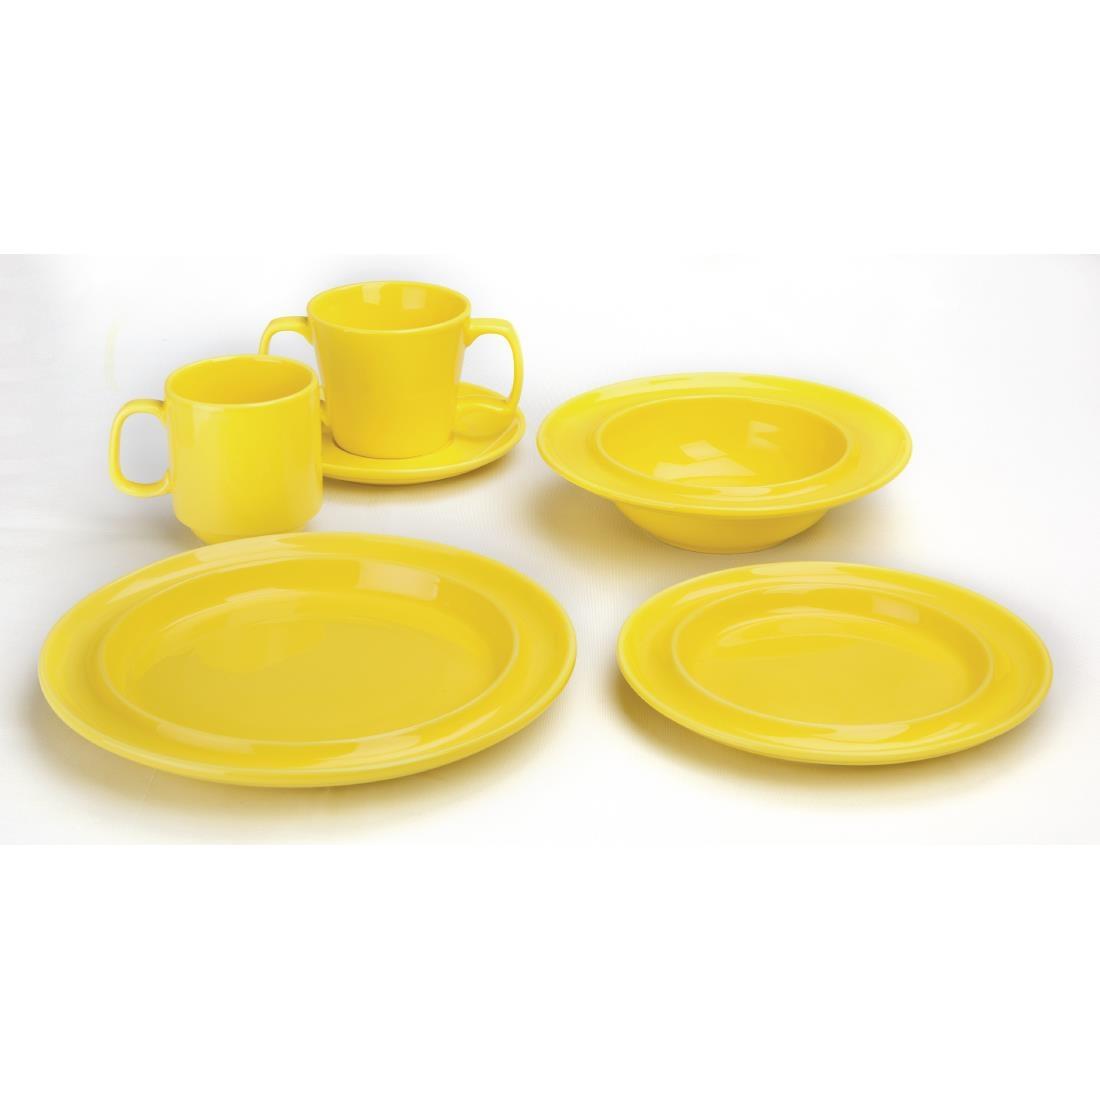 Olympia Heritage Double Handle Mugs Yellow 300ml (Pack of 6) - DW149  - 3